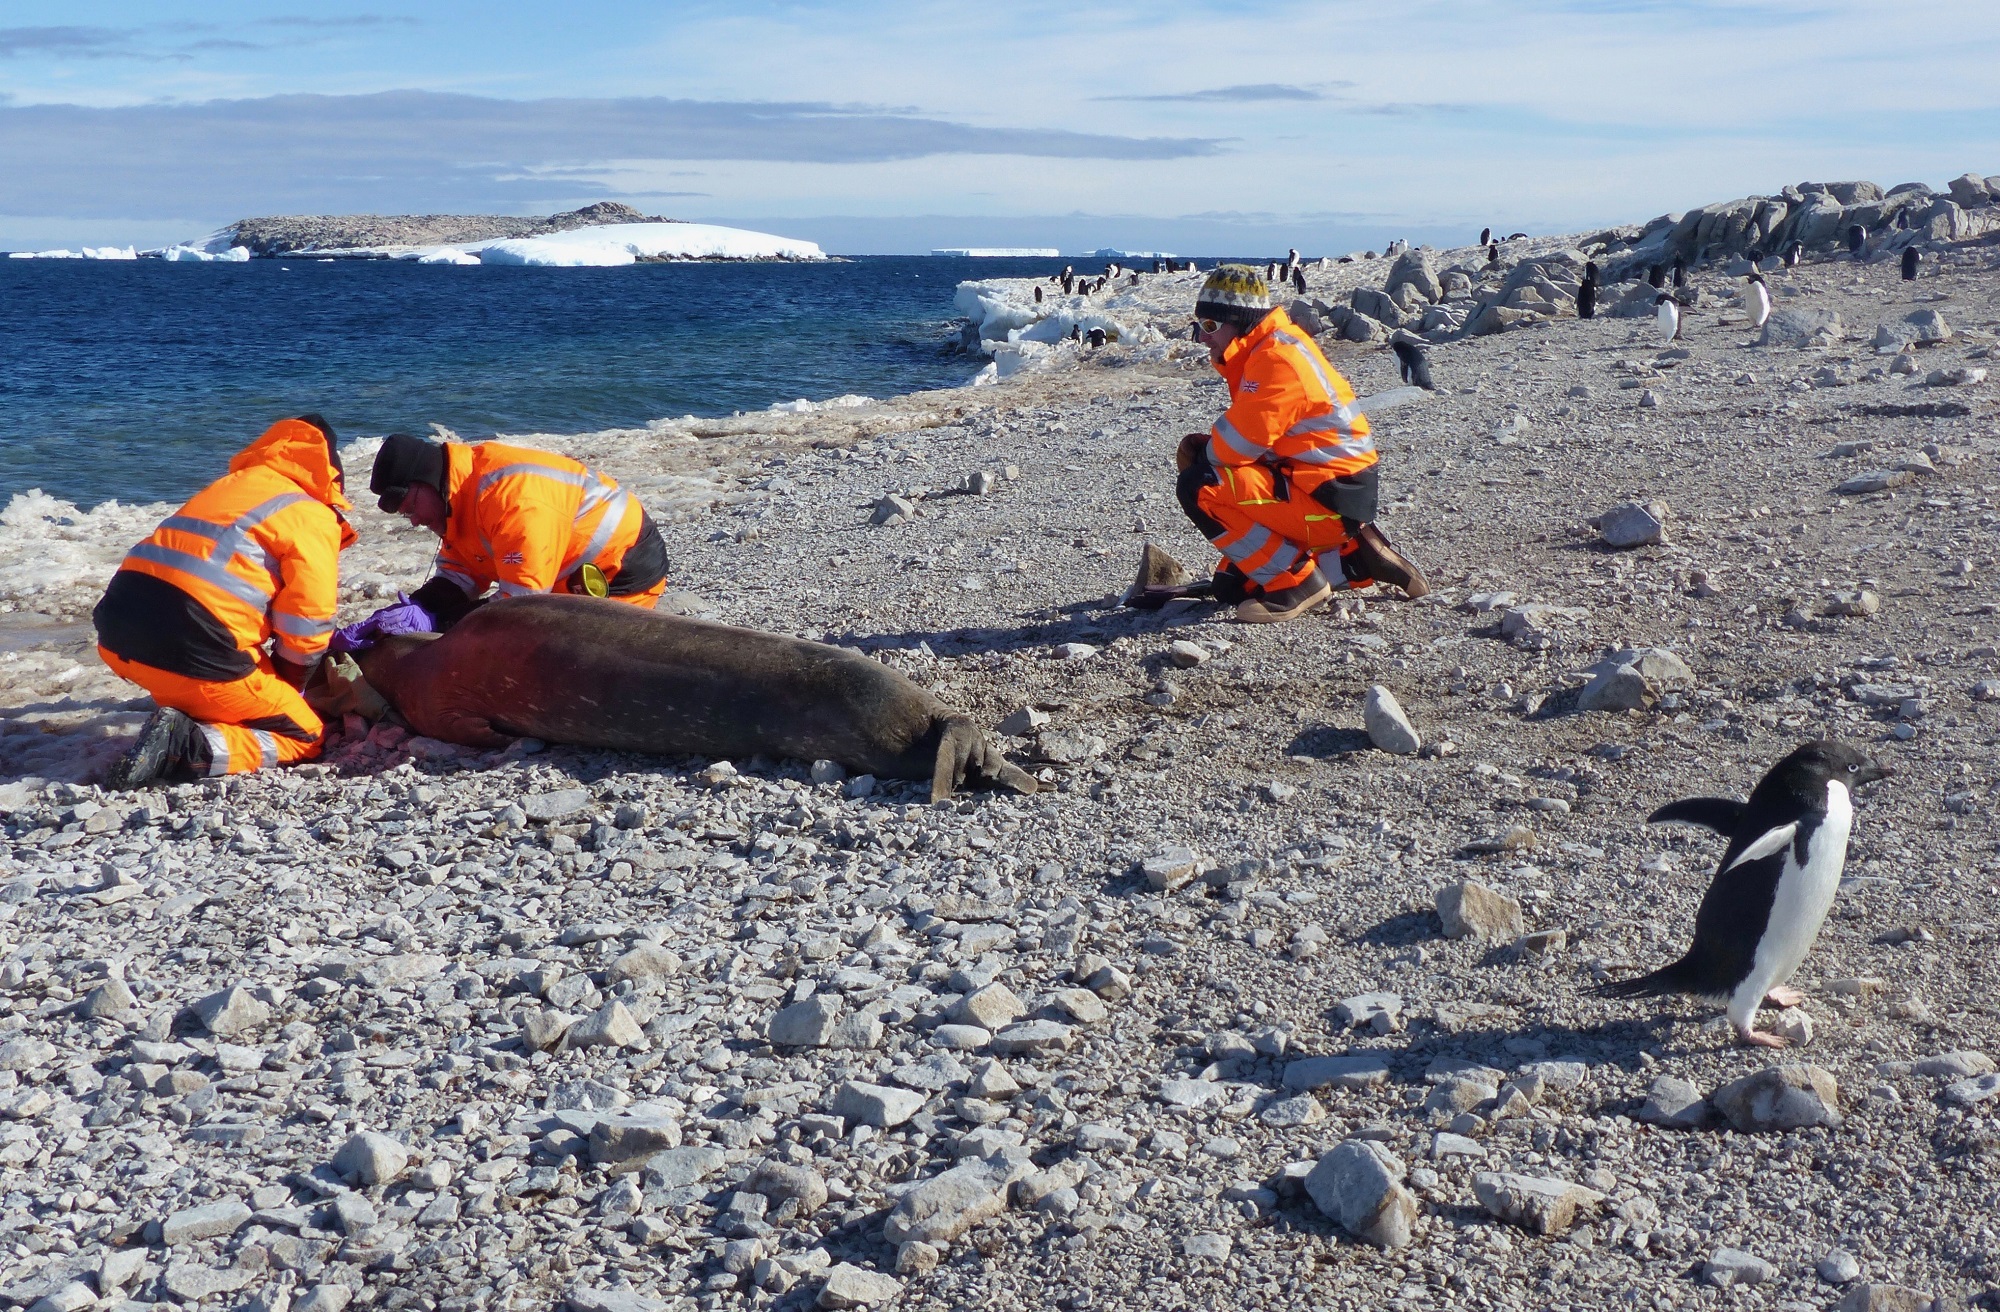 Mark Barham (right) keeps watch of the application procedure to ensure the safety of the seal and team members, Lars and Gui, while absorbed by their work. Photo credit:Tasha Snow